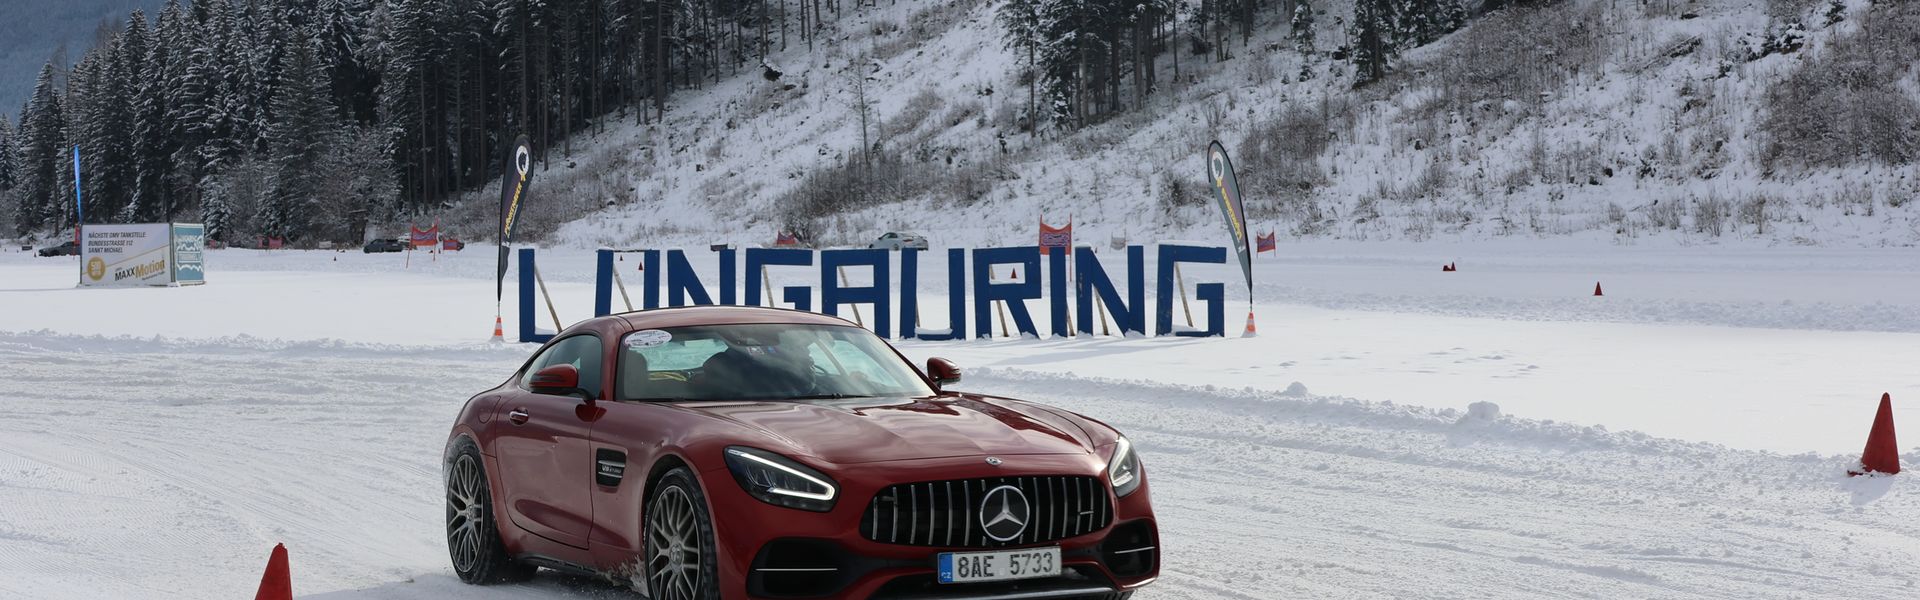 Snowdriving Lungauring 16.-17.1.2023